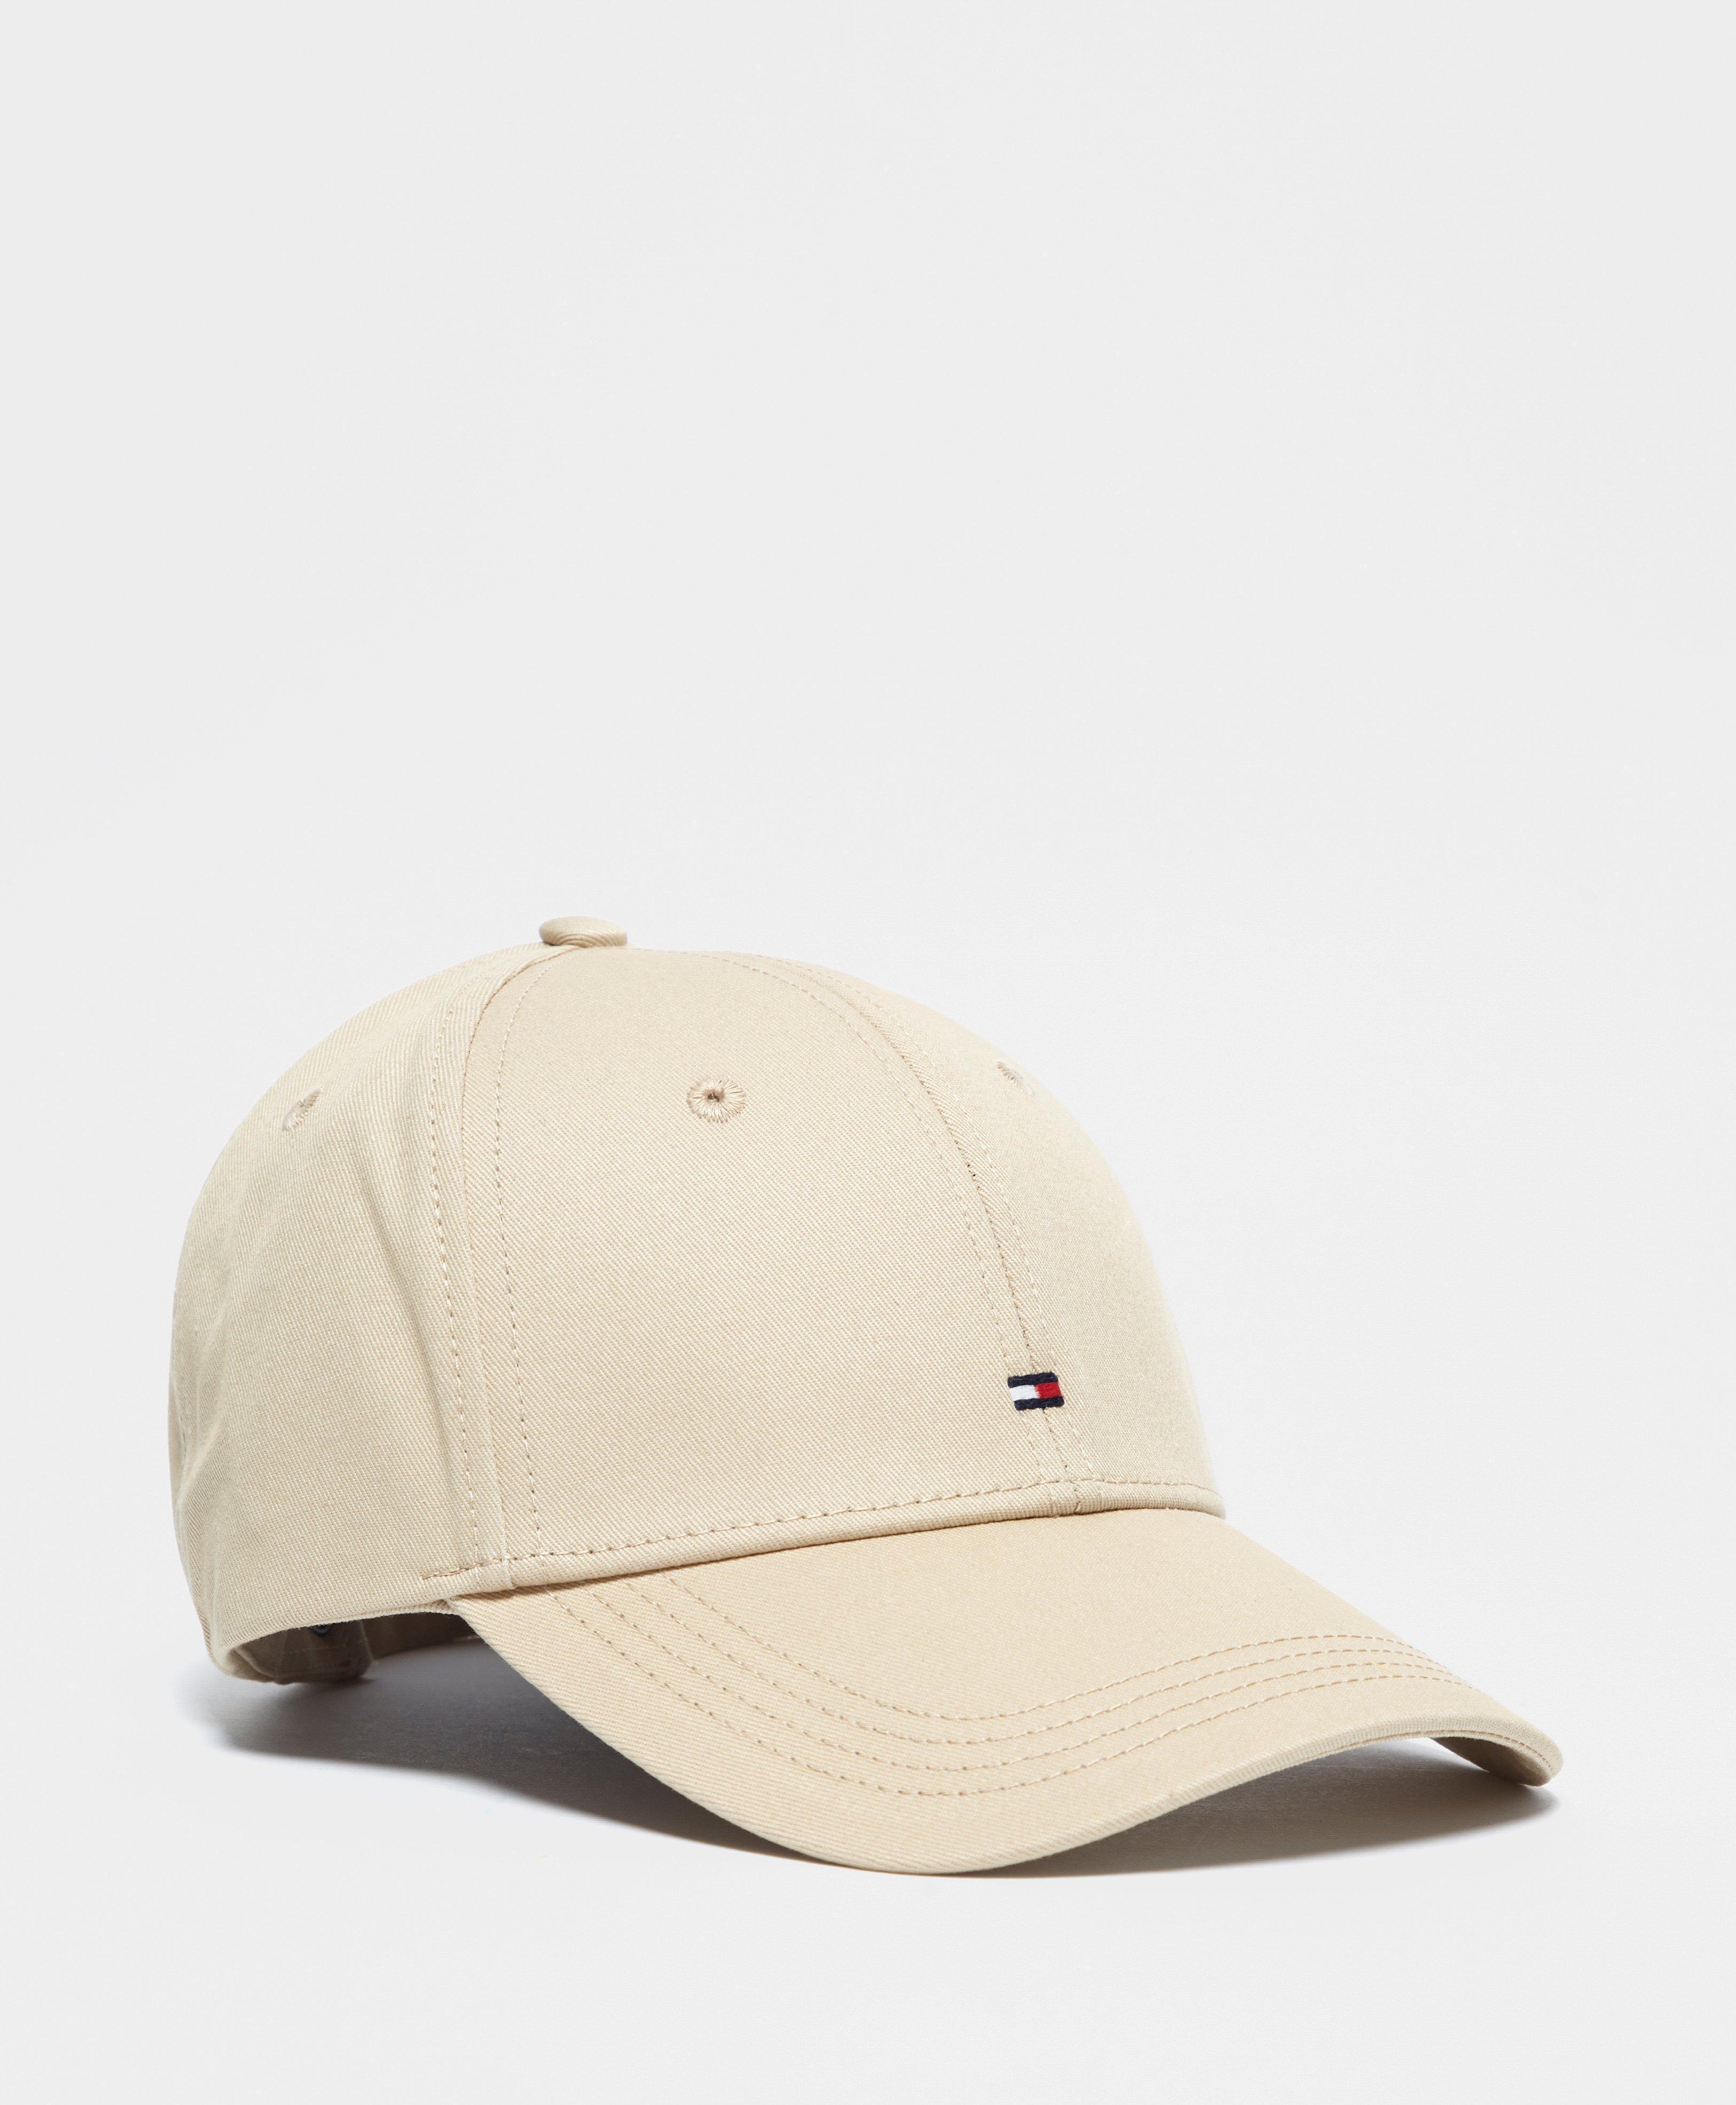 Tommy Hilfiger Flag Cap (Navy/Beige), Men\'s Carousell Accessories, Watches & on Fashion, Hats Caps 